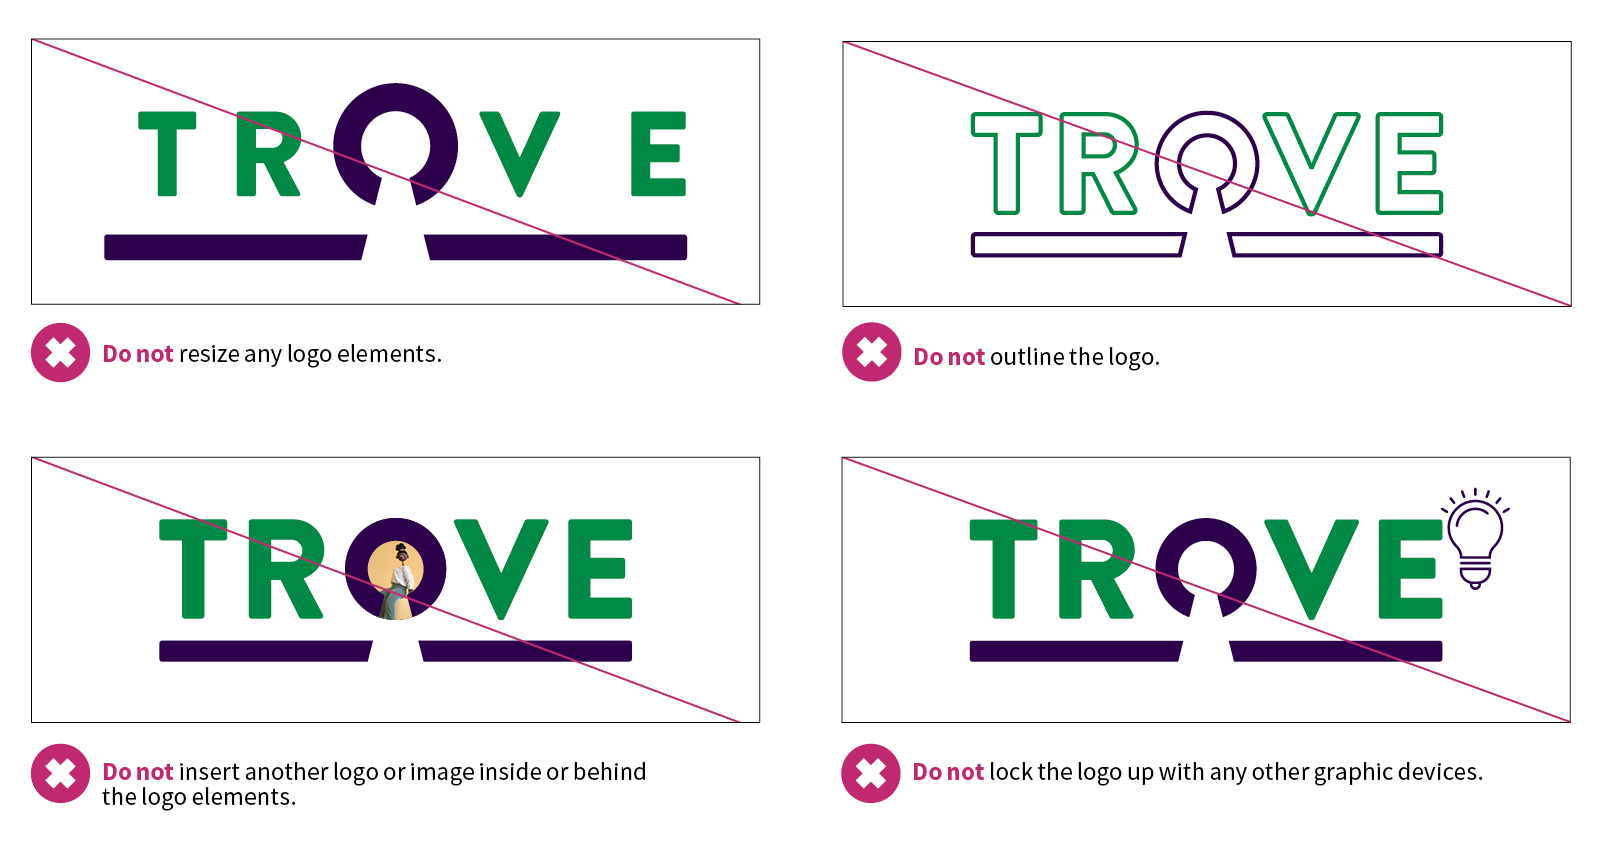 Examples of misuse of Trove logo